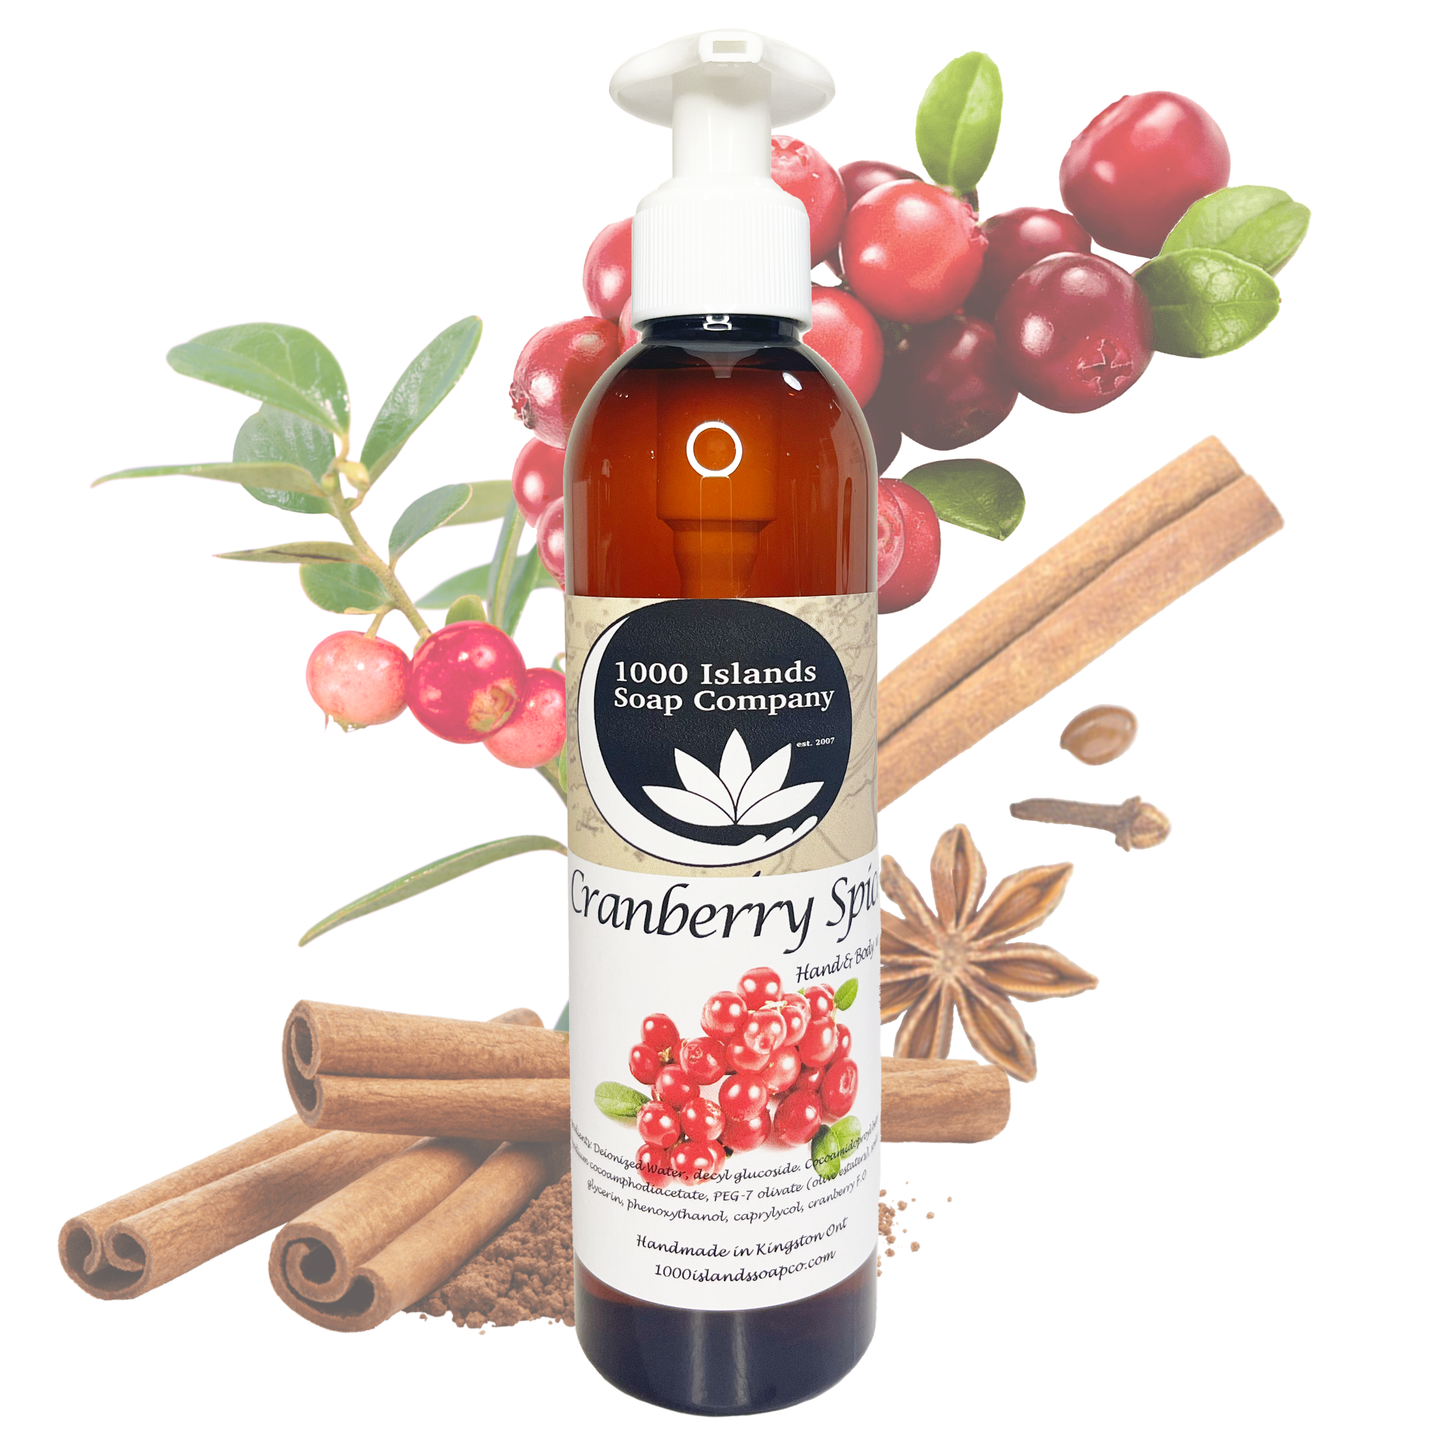 Cranberry Spice Hand & Body Wash